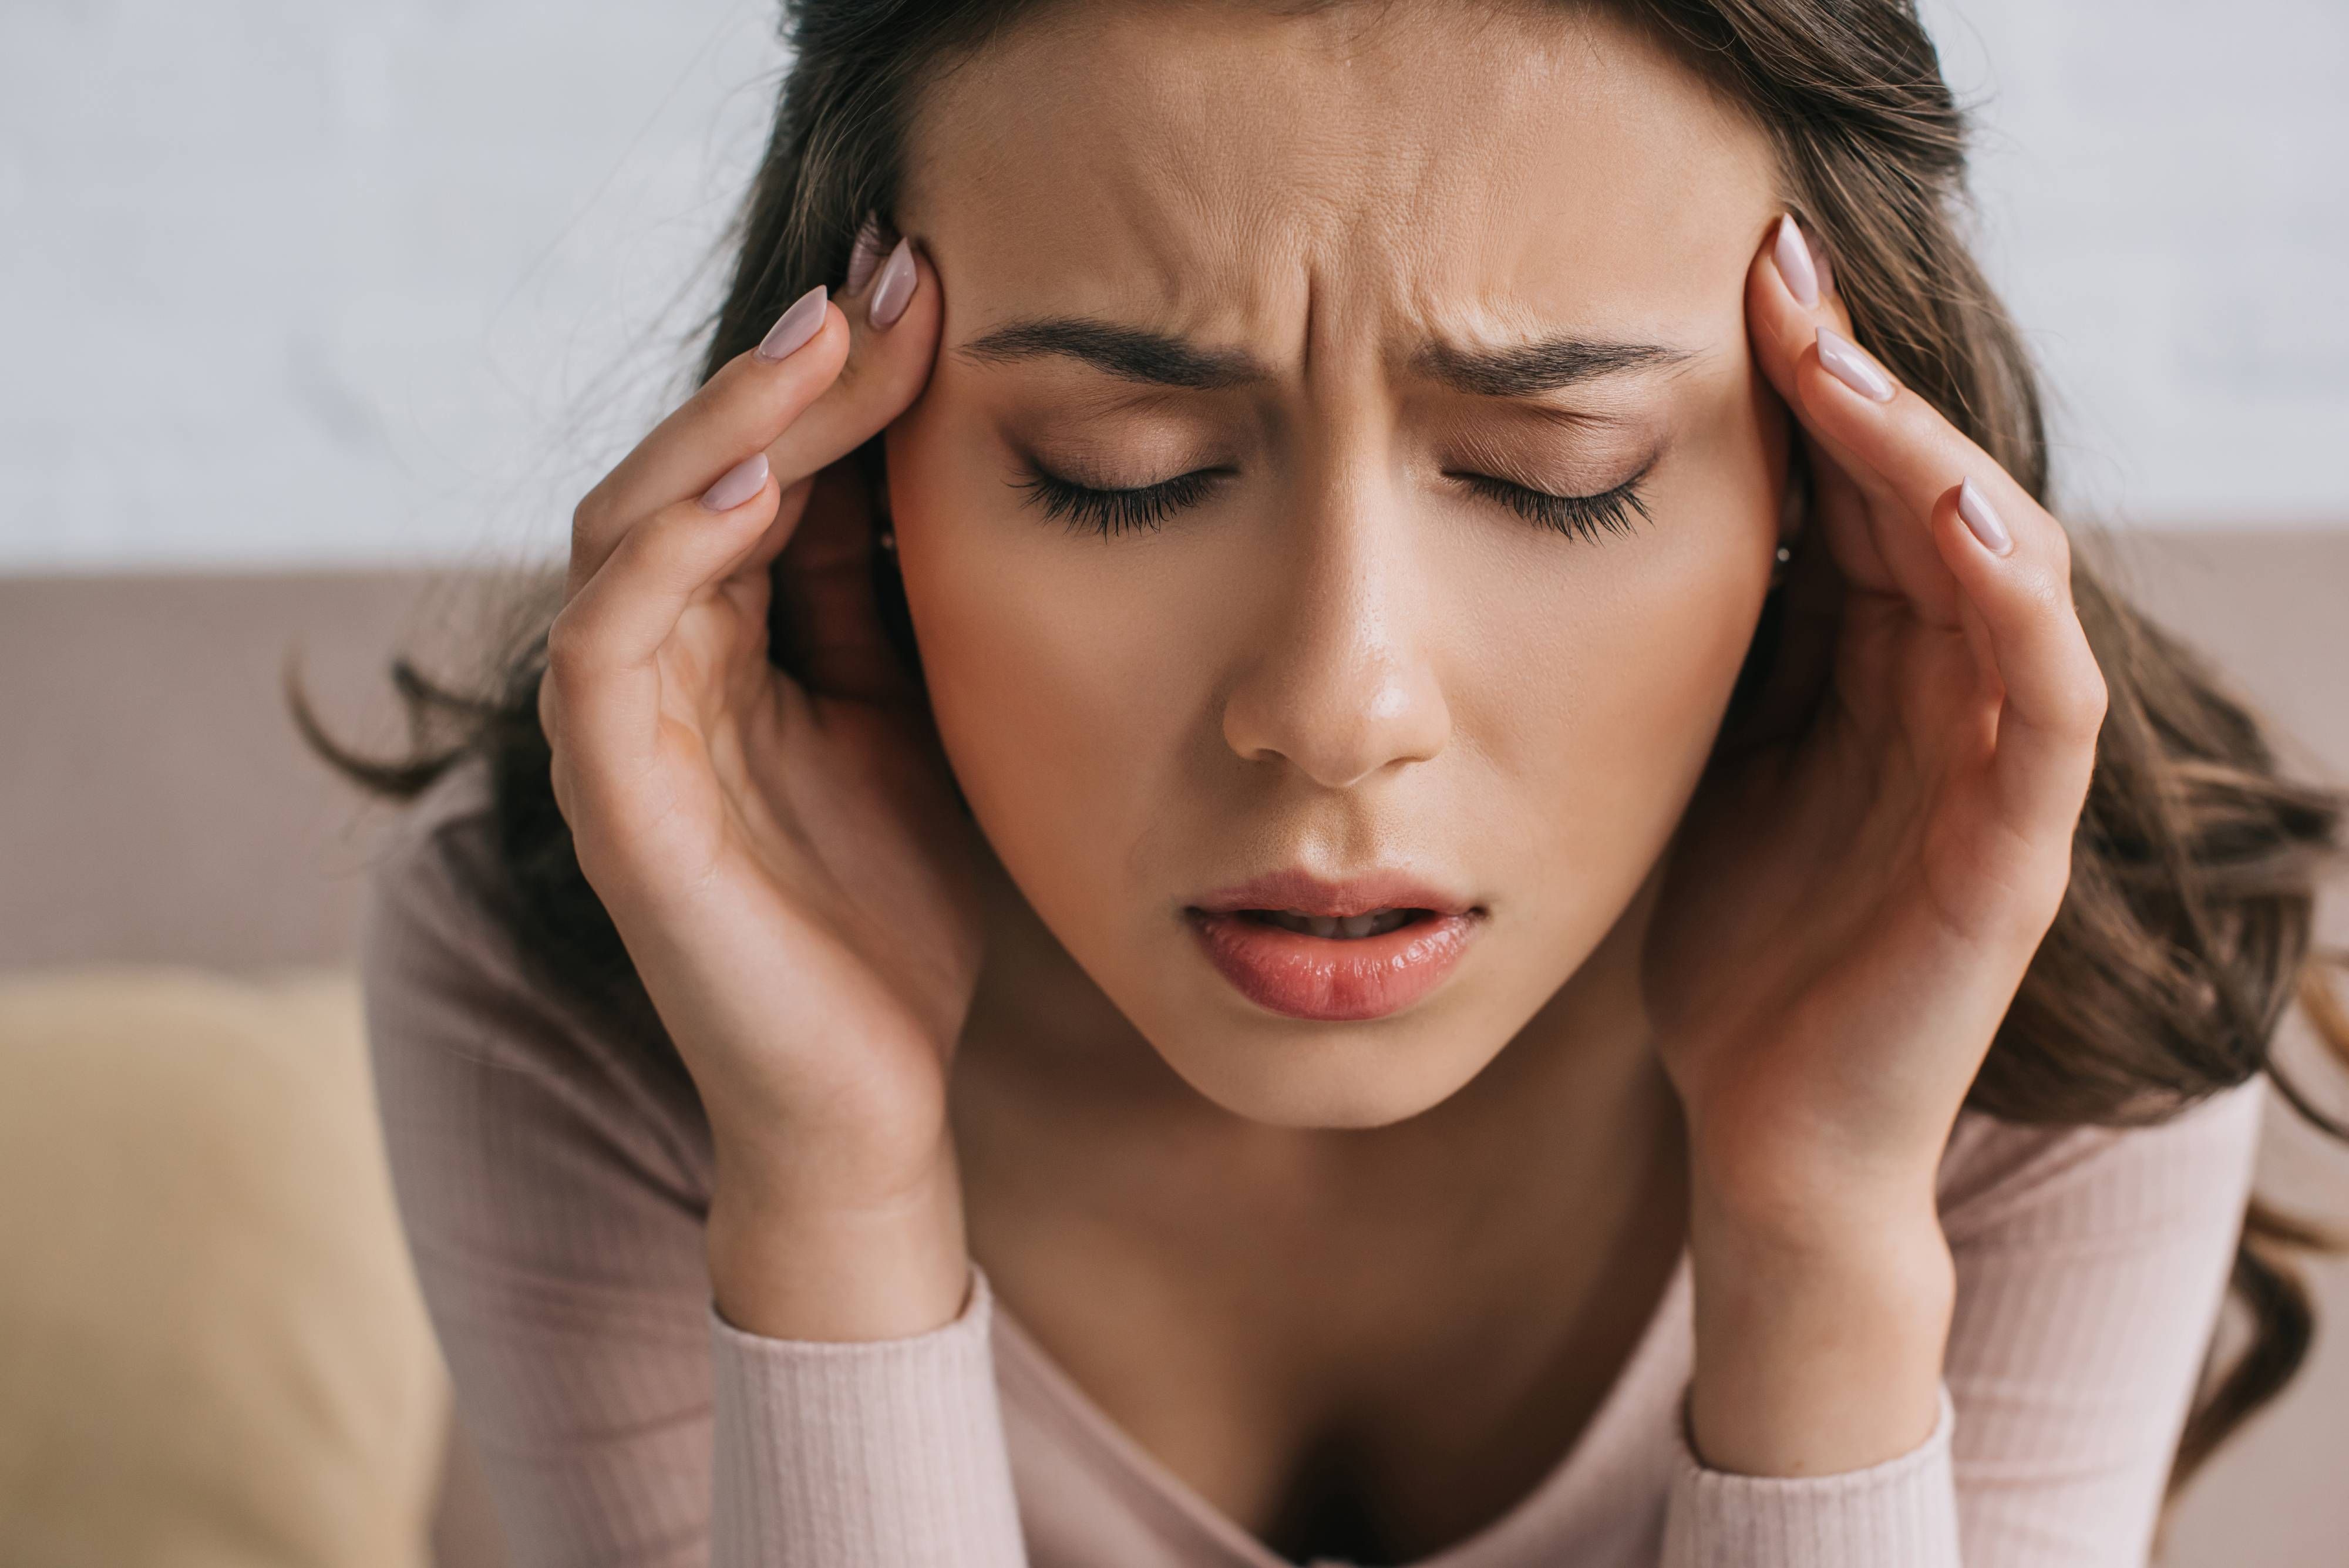 Treating Headaches With Chiropractic Care